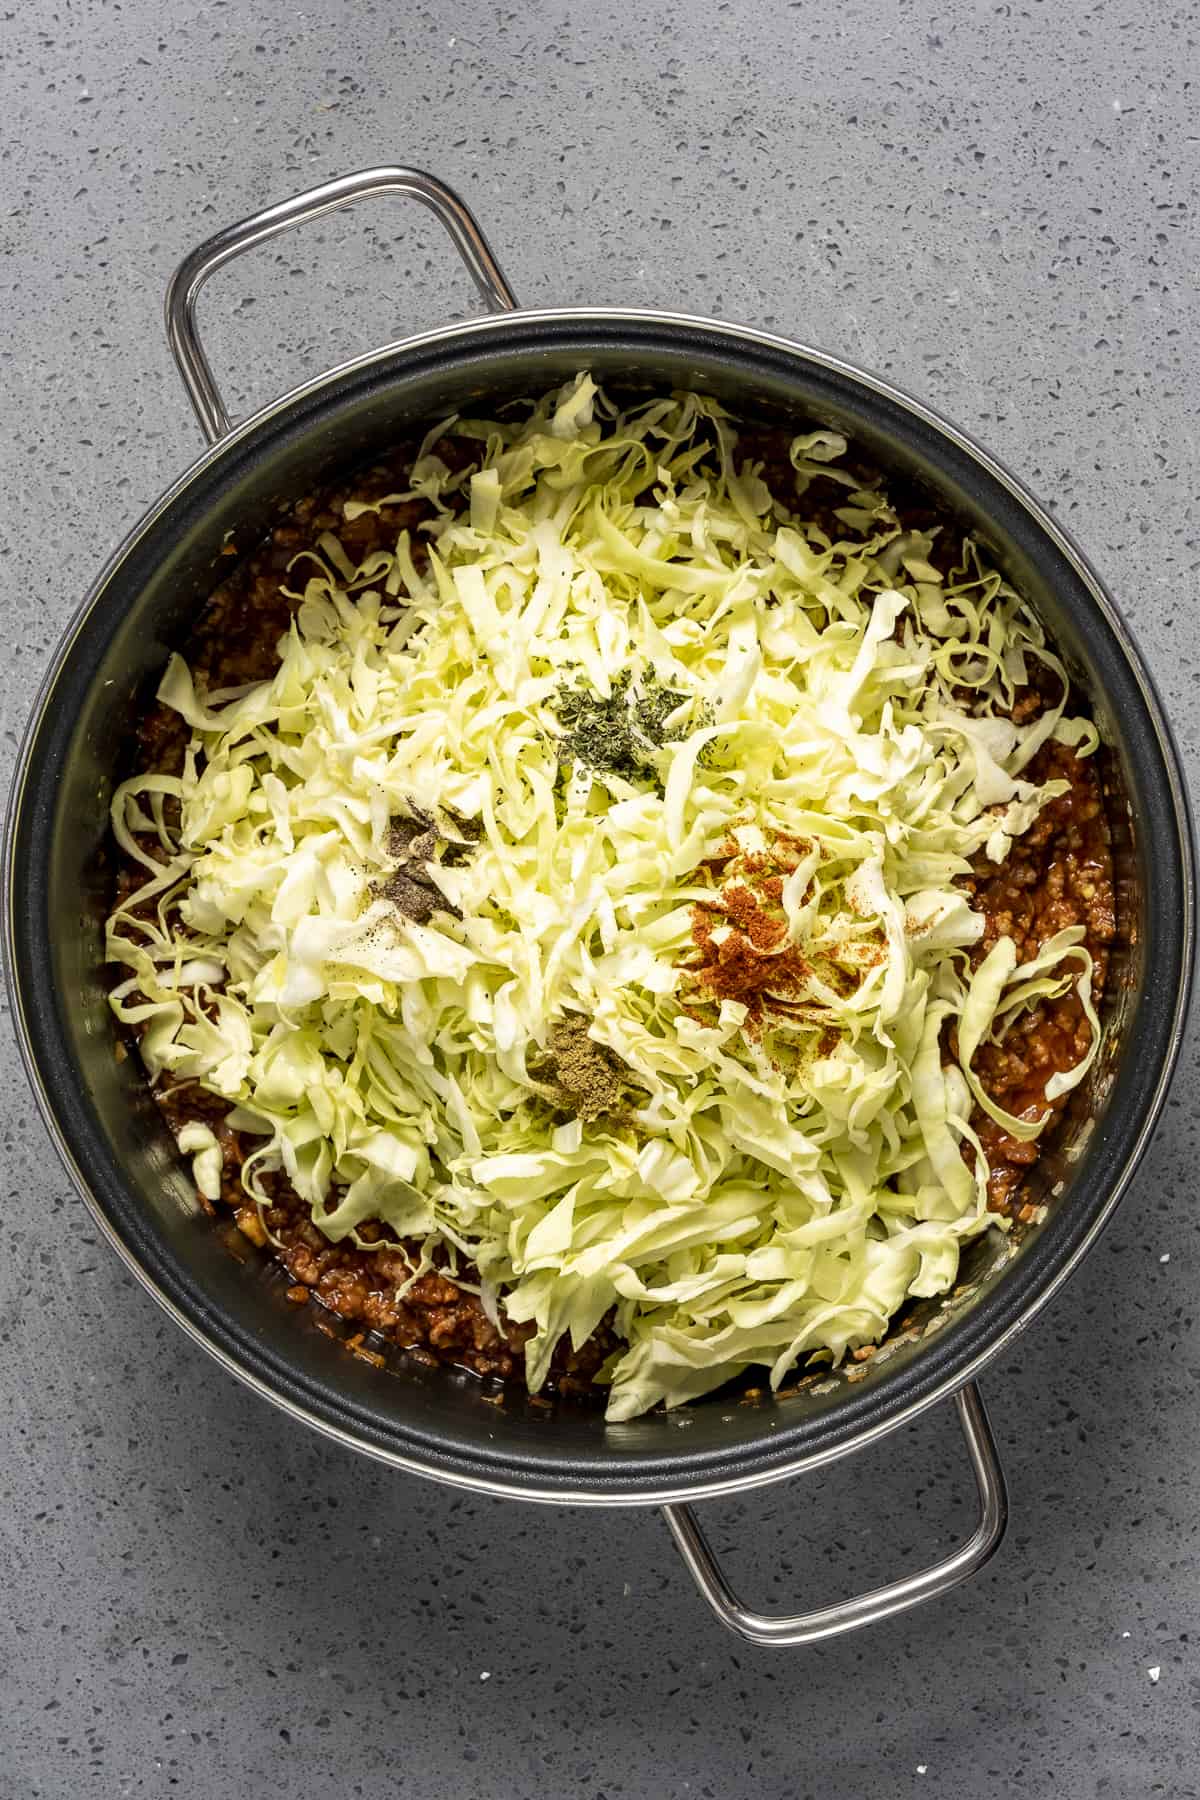 Shredded cabbage, spices and ground beef in a large pot.